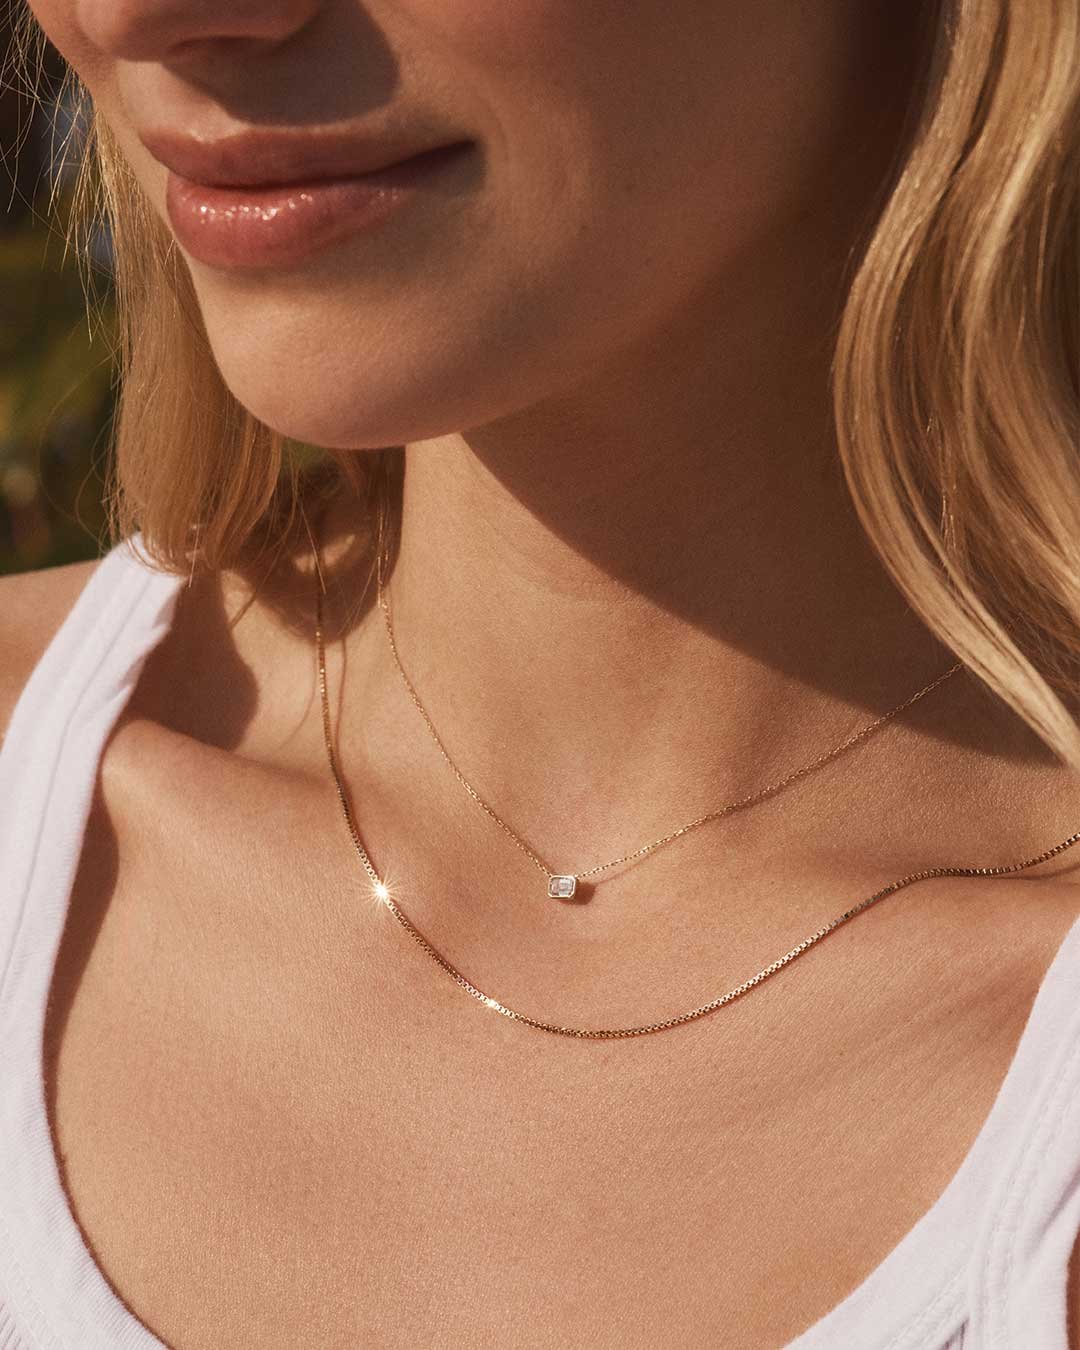 Woman wearing diamond pendant and gold chain necklace